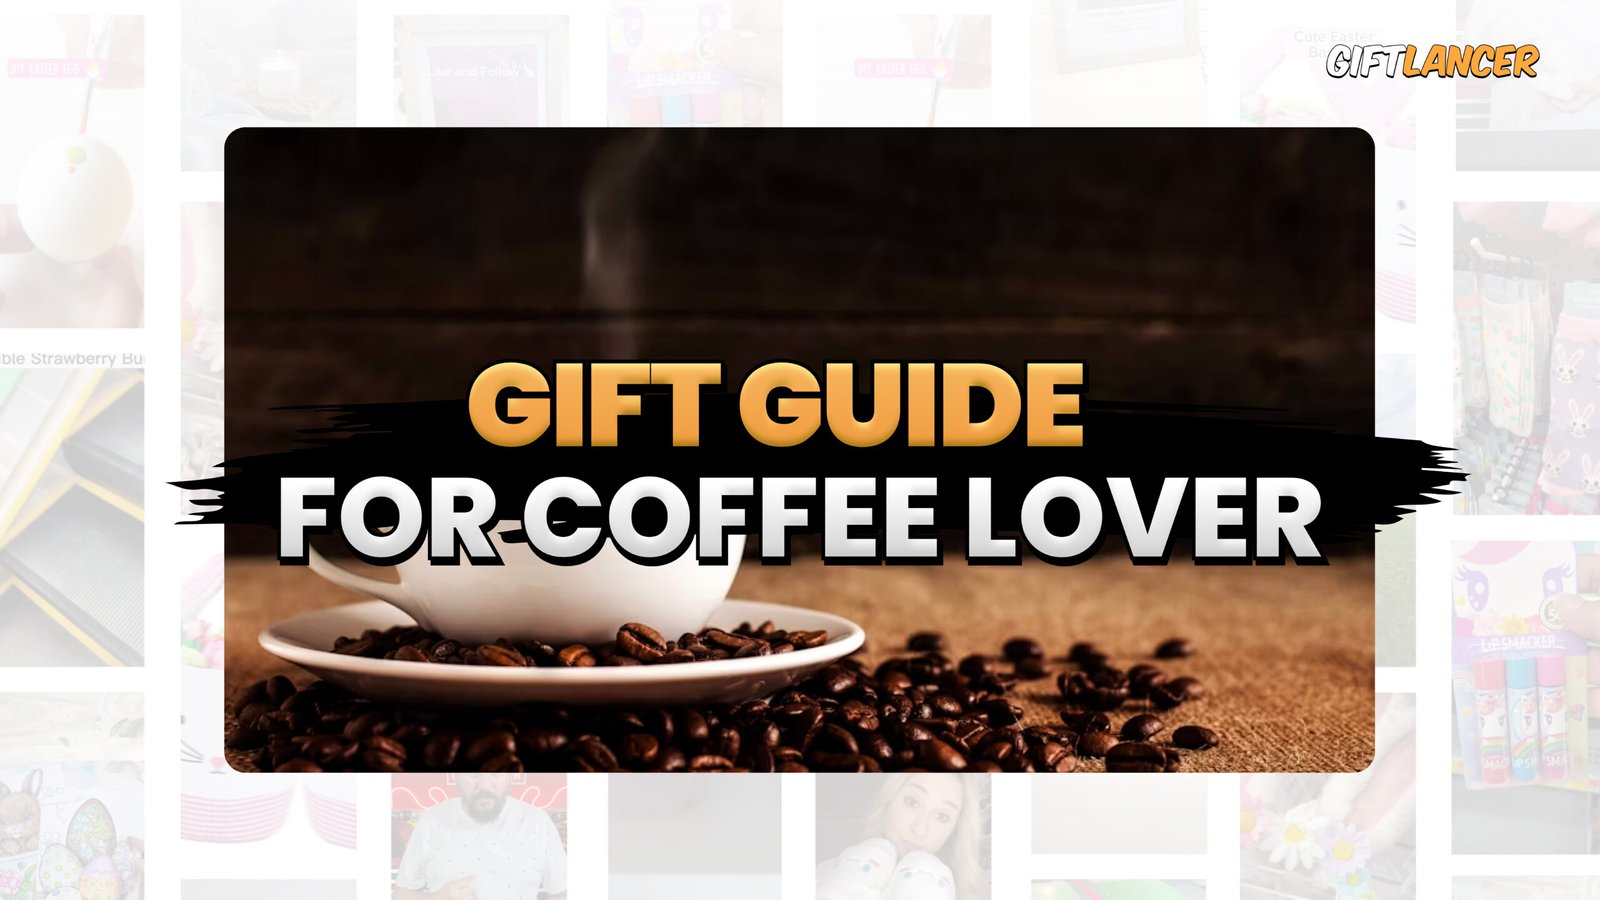 A Mexican-born coffee lover suggests 5 gifts for a coworker who enjoys coffee!